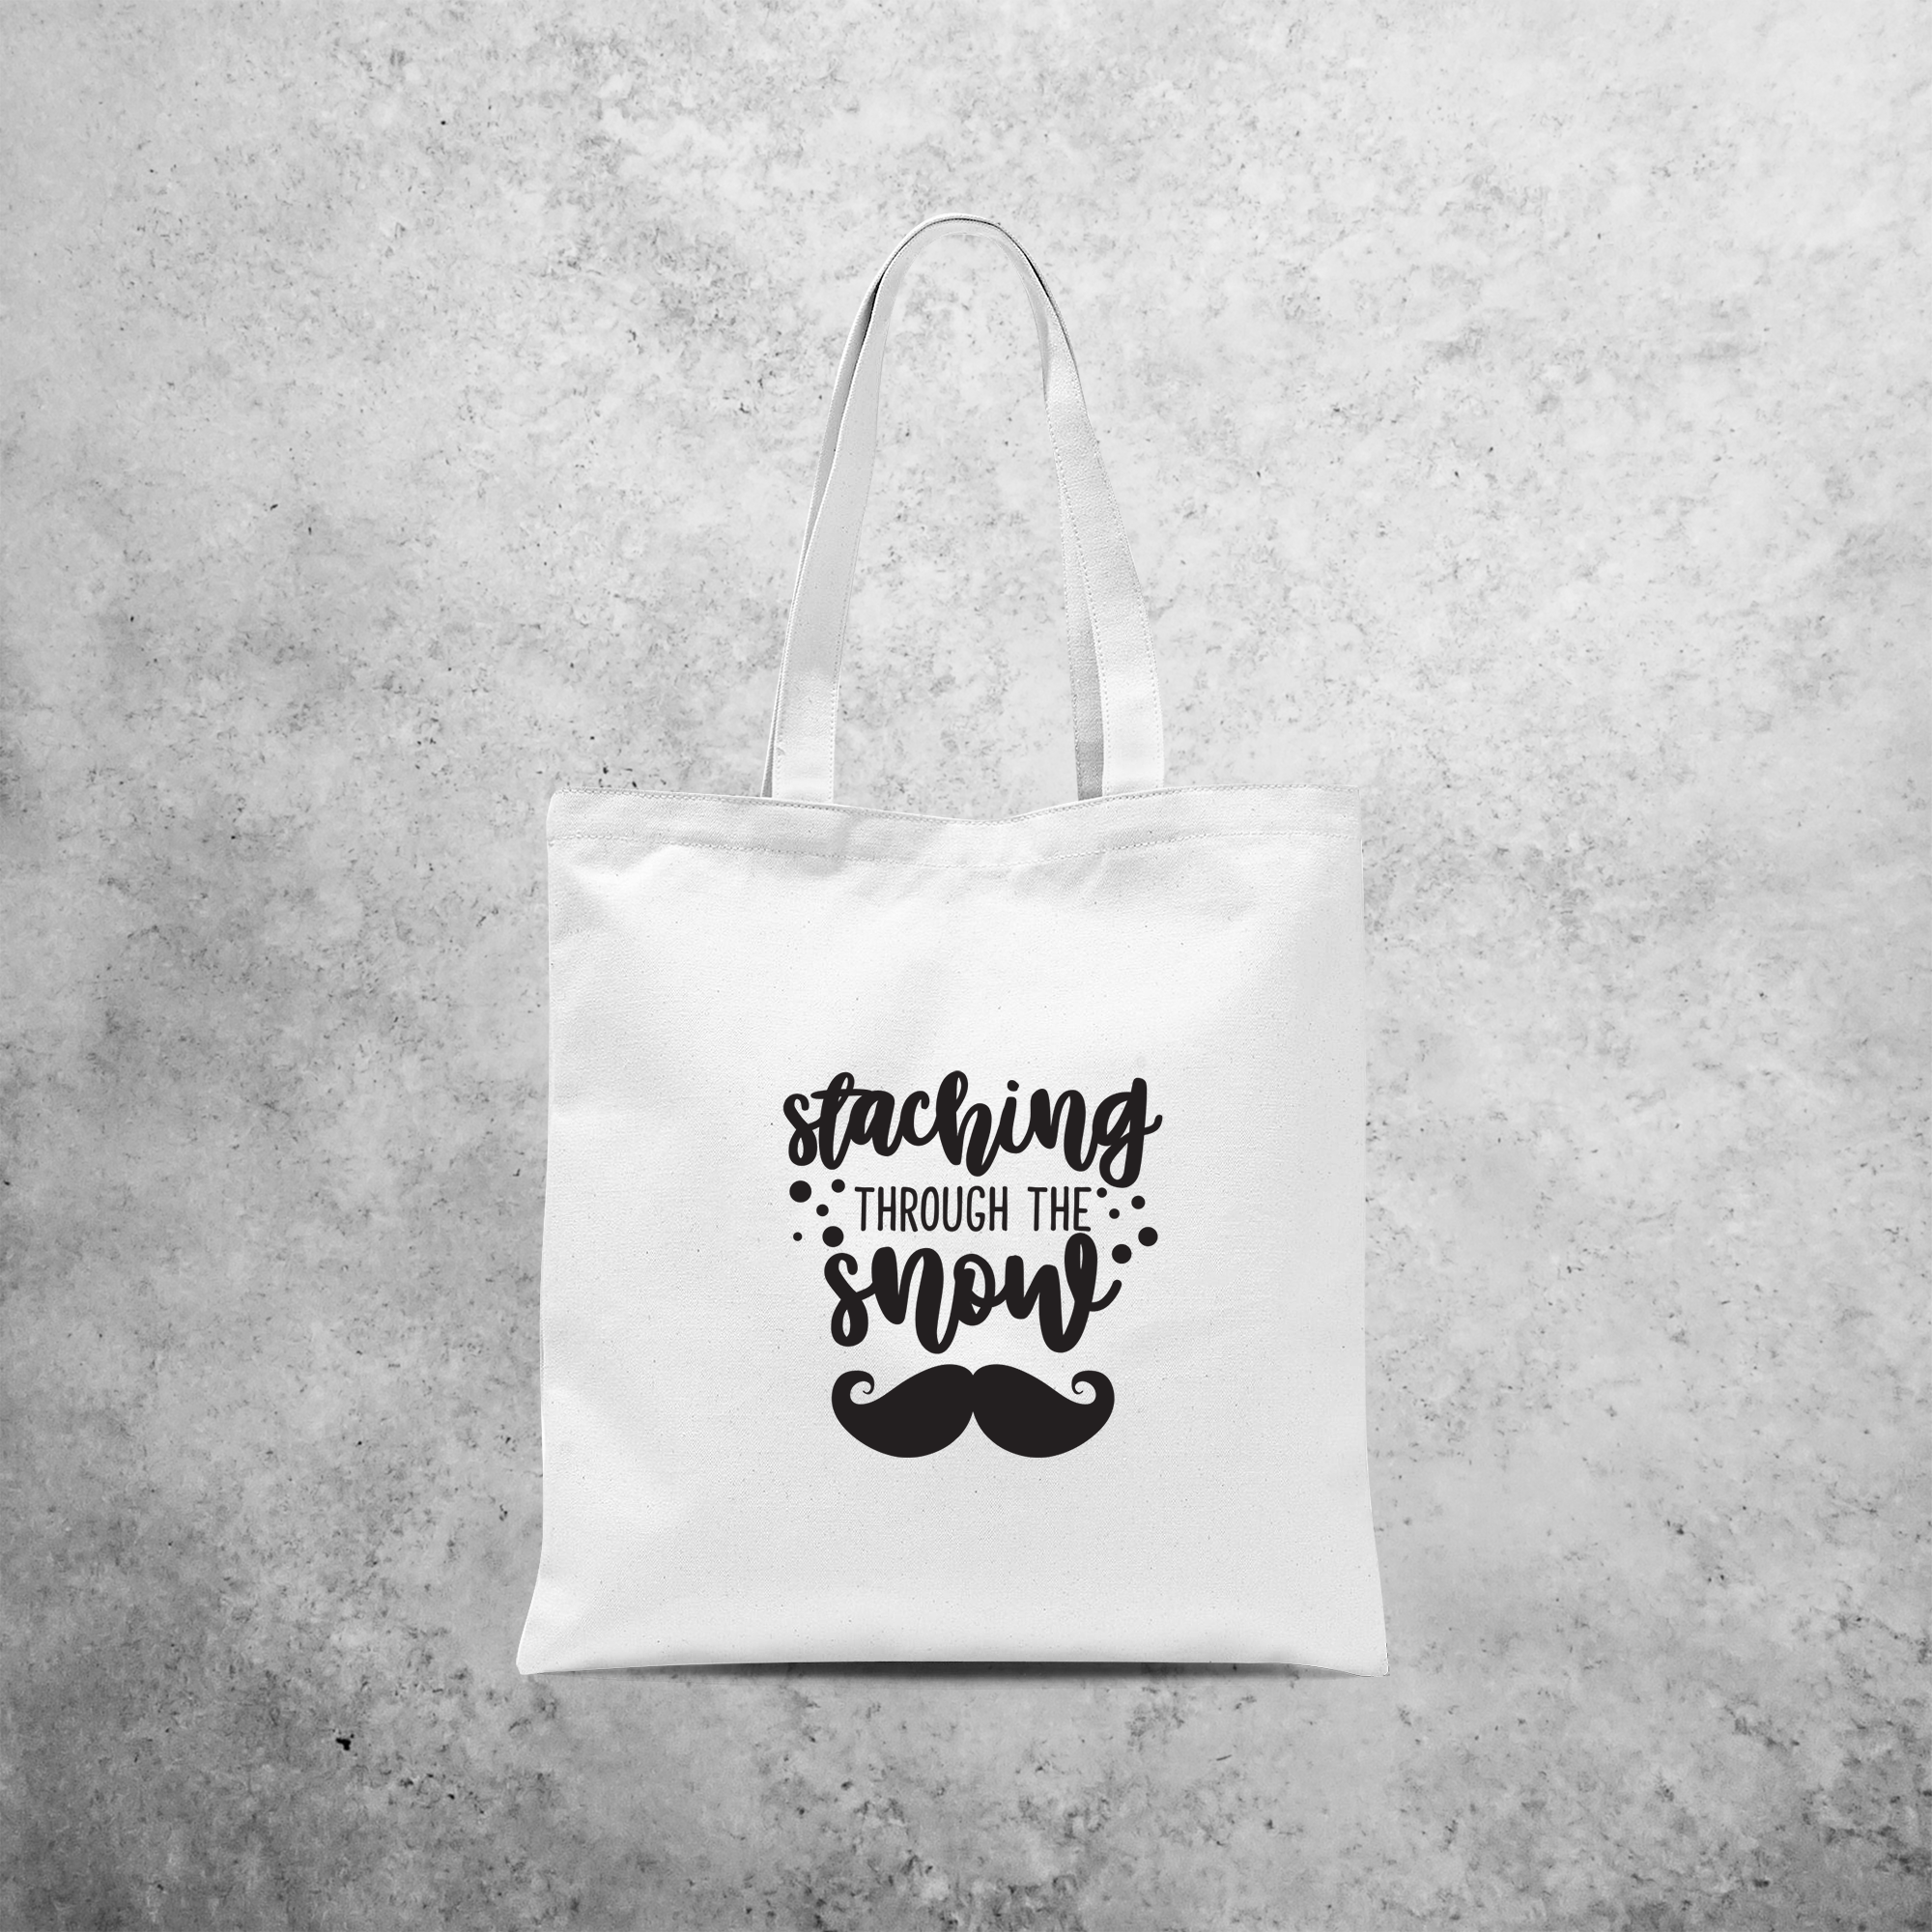 Tote bag, with ‘Staching through the snow’ print by KMLeon.